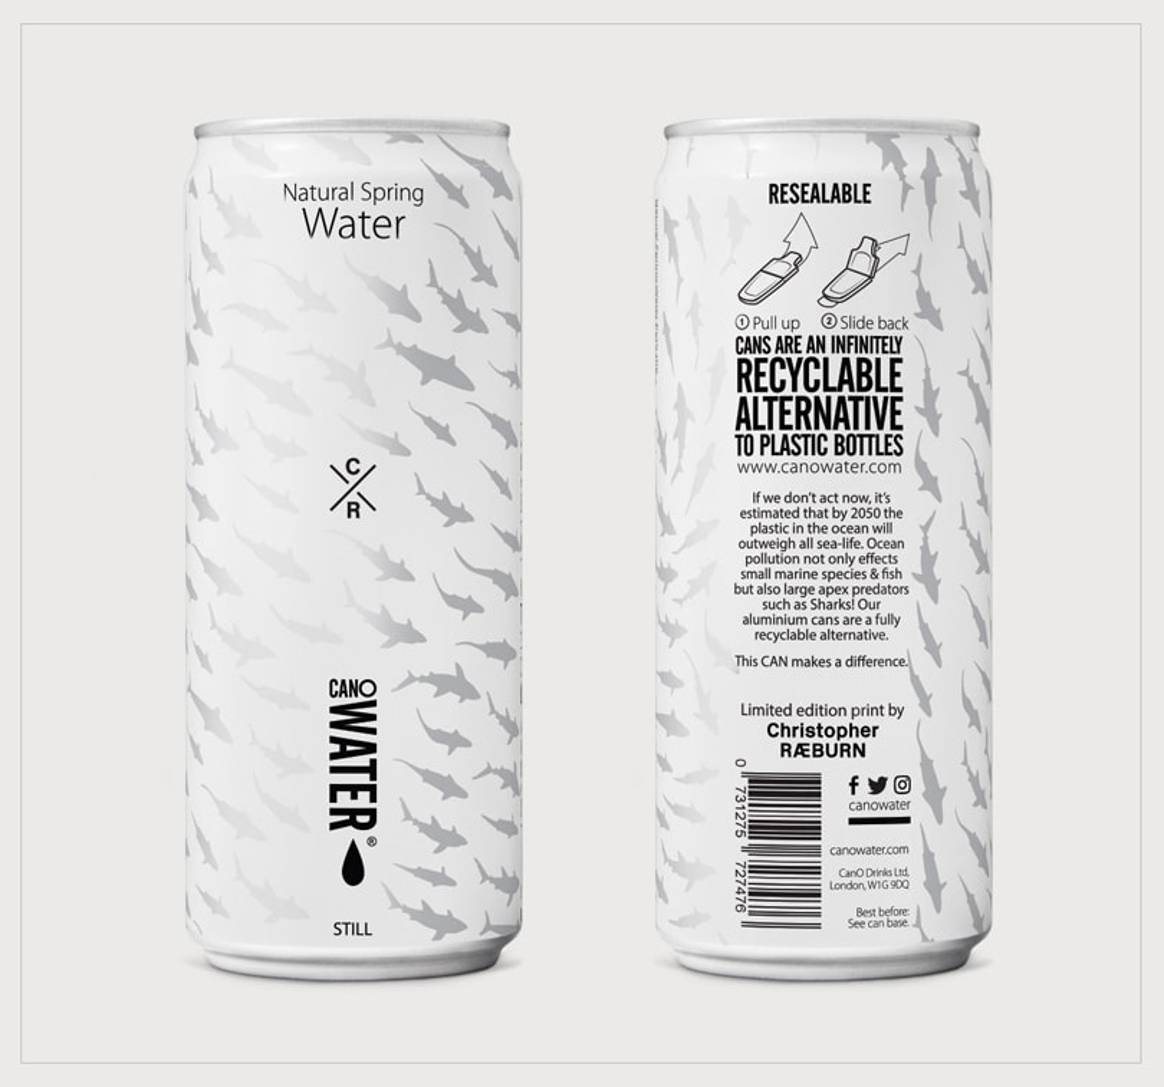 Christopher Raeburn designs aluminum water cans for London Zoo